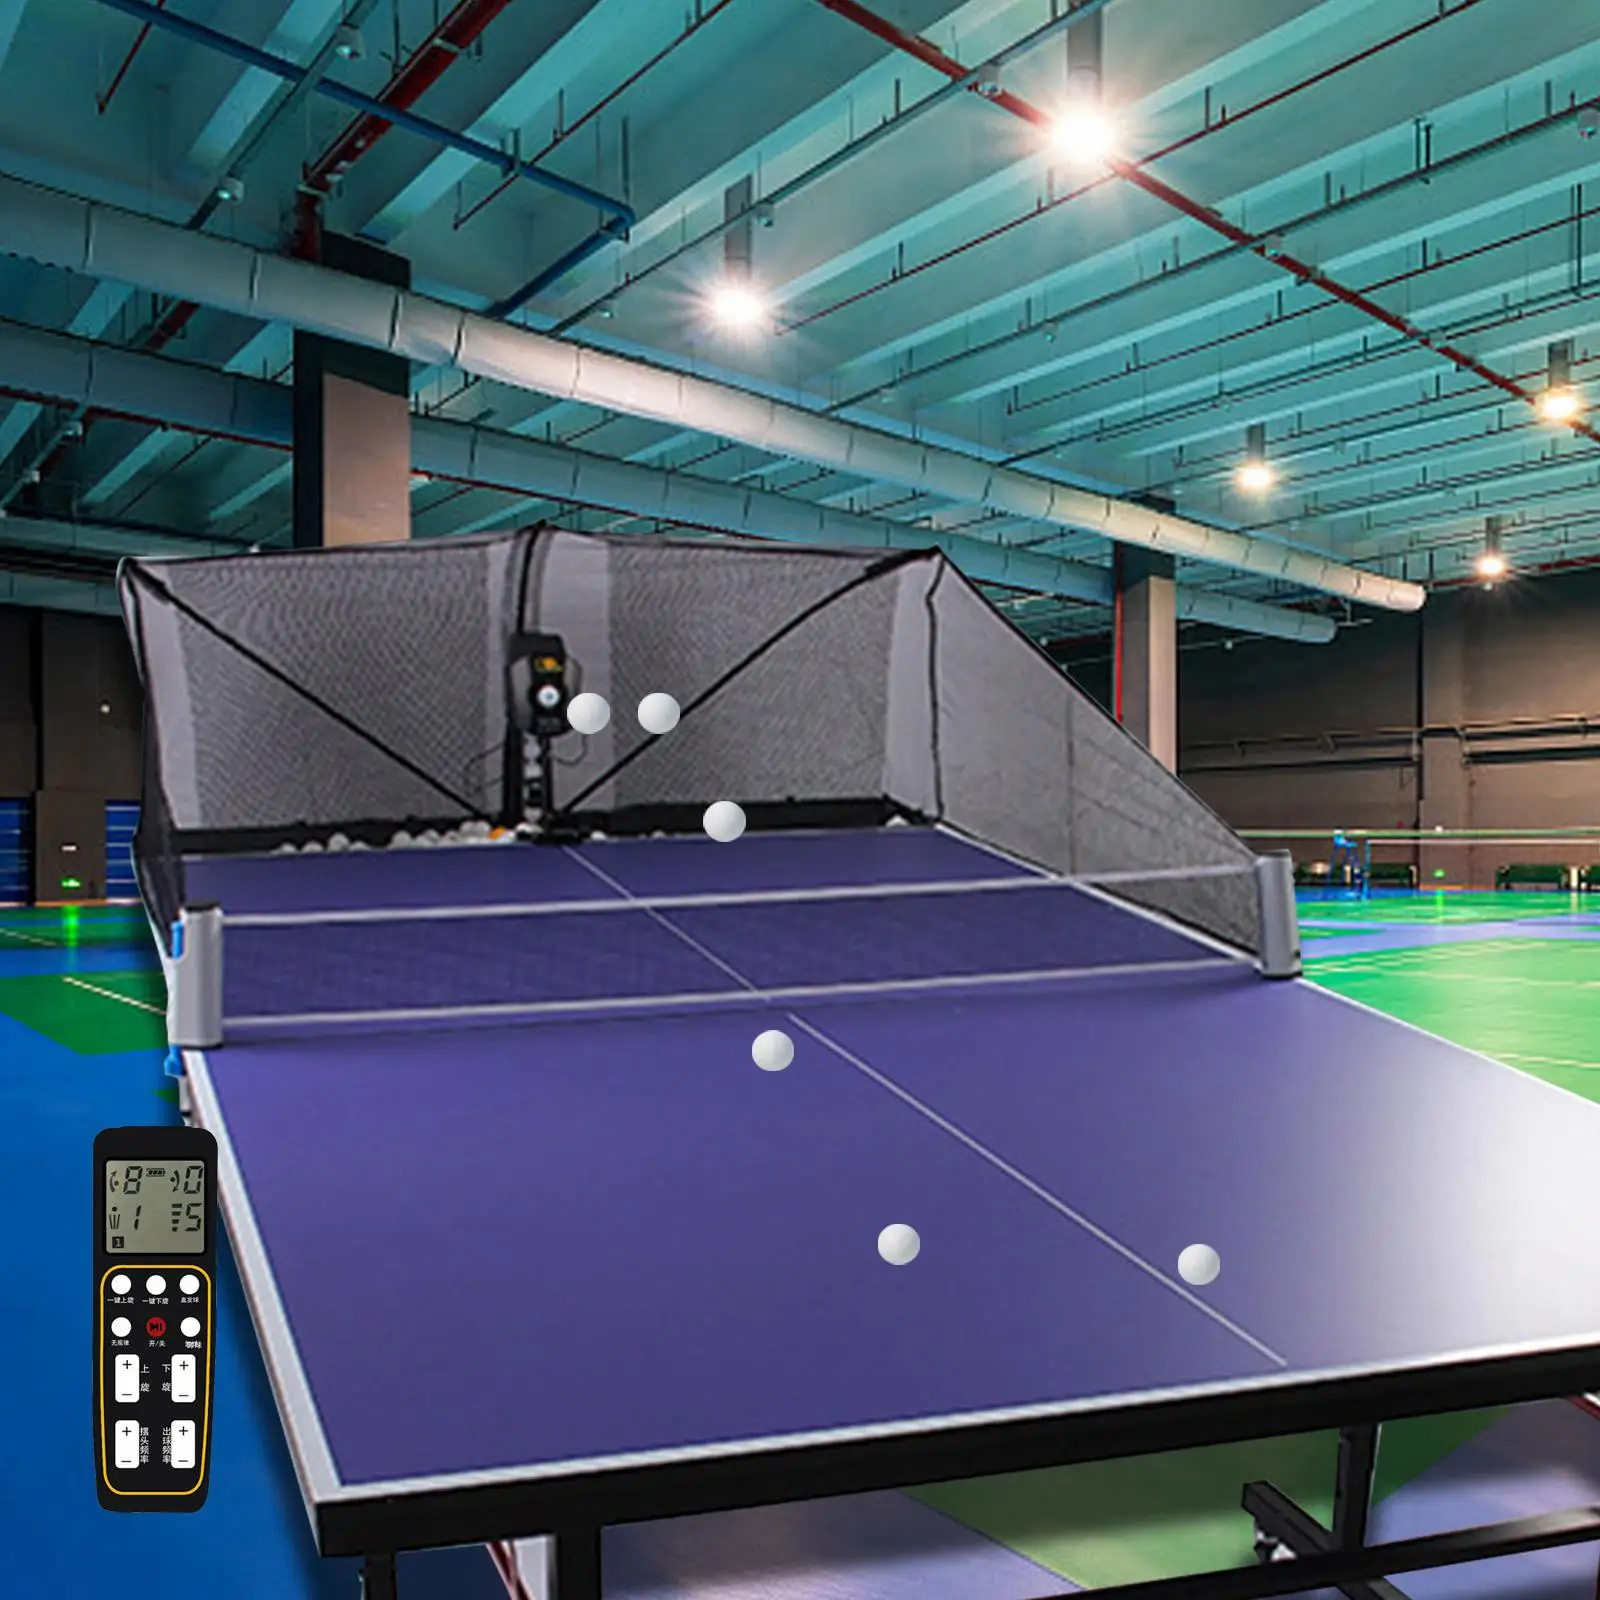 

Ping Pong Ball Machine with Table Tennis Balls Ping Pong Robot Server Table Tennis Automatic Ball Serving Machine for Player